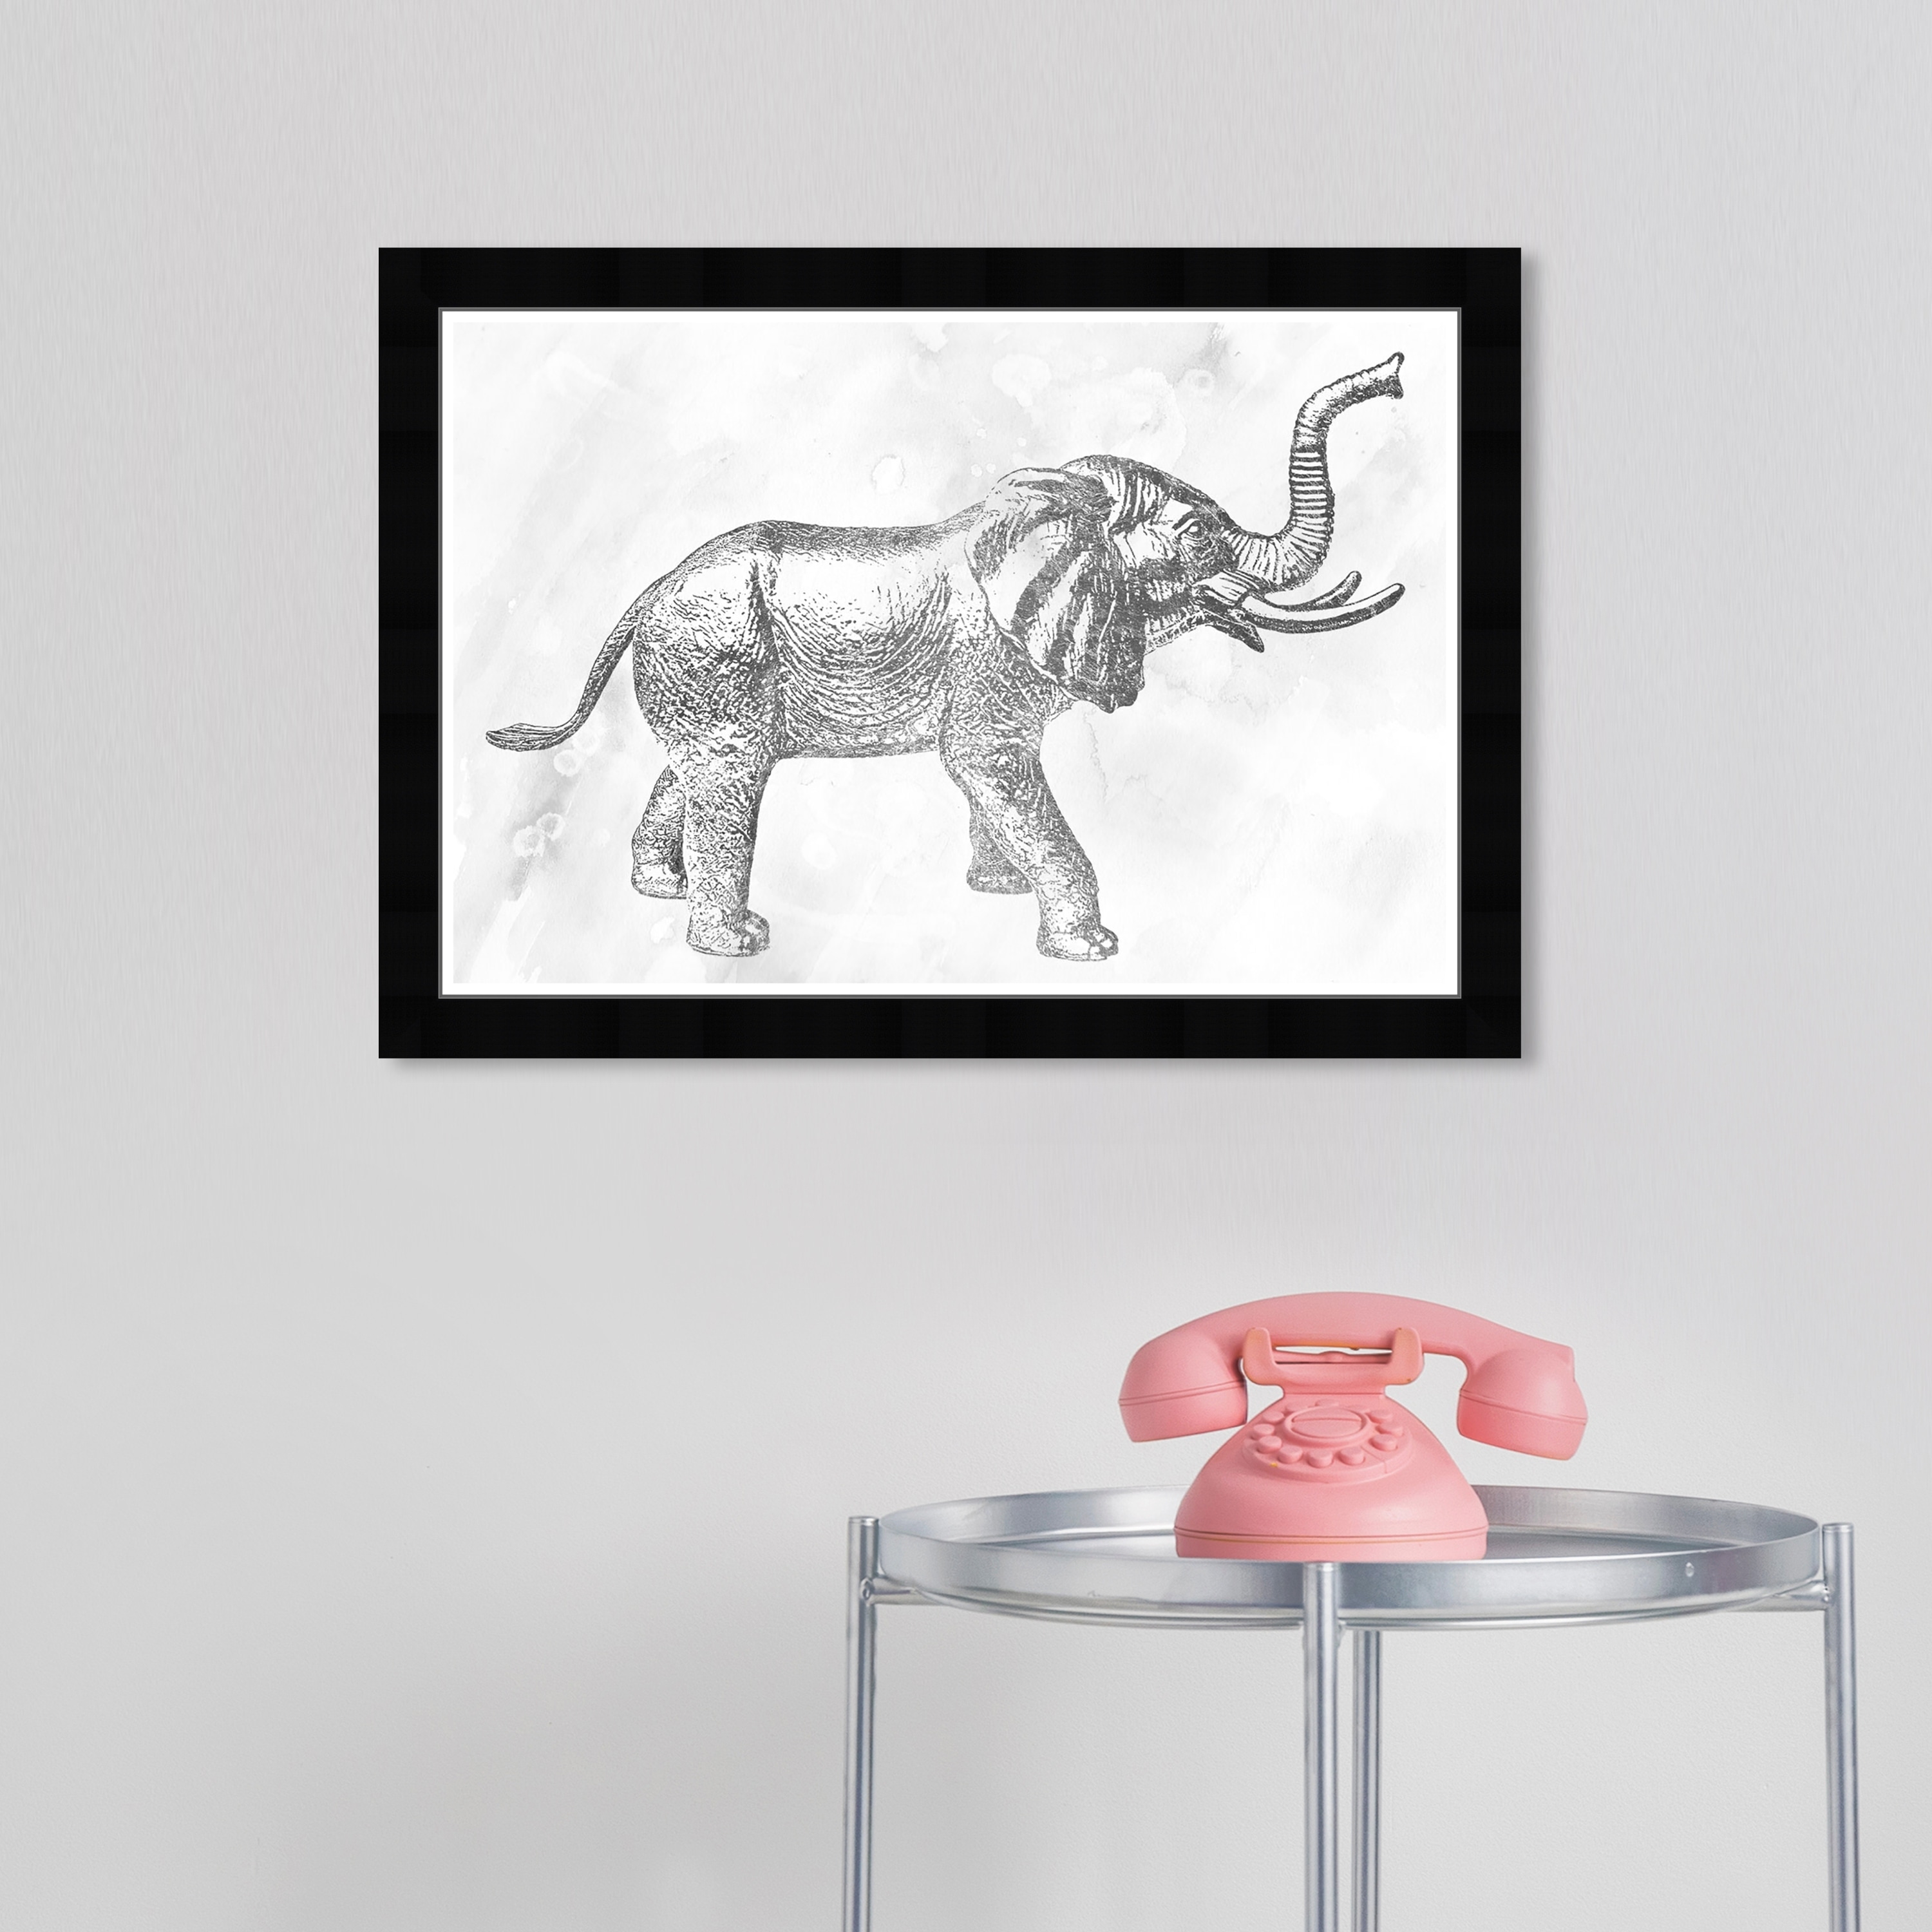 https://ak1.ostkcdn.com/images/products/is/images/direct/86b18f8e819042743ba04359580bf948aeb34383/Wynwood-Studio-%27Elephant-Silver%27-Animals-Wall-Art-Framed-Print-Zoo-and-Wild-Animals---Gray%2C-White.jpg